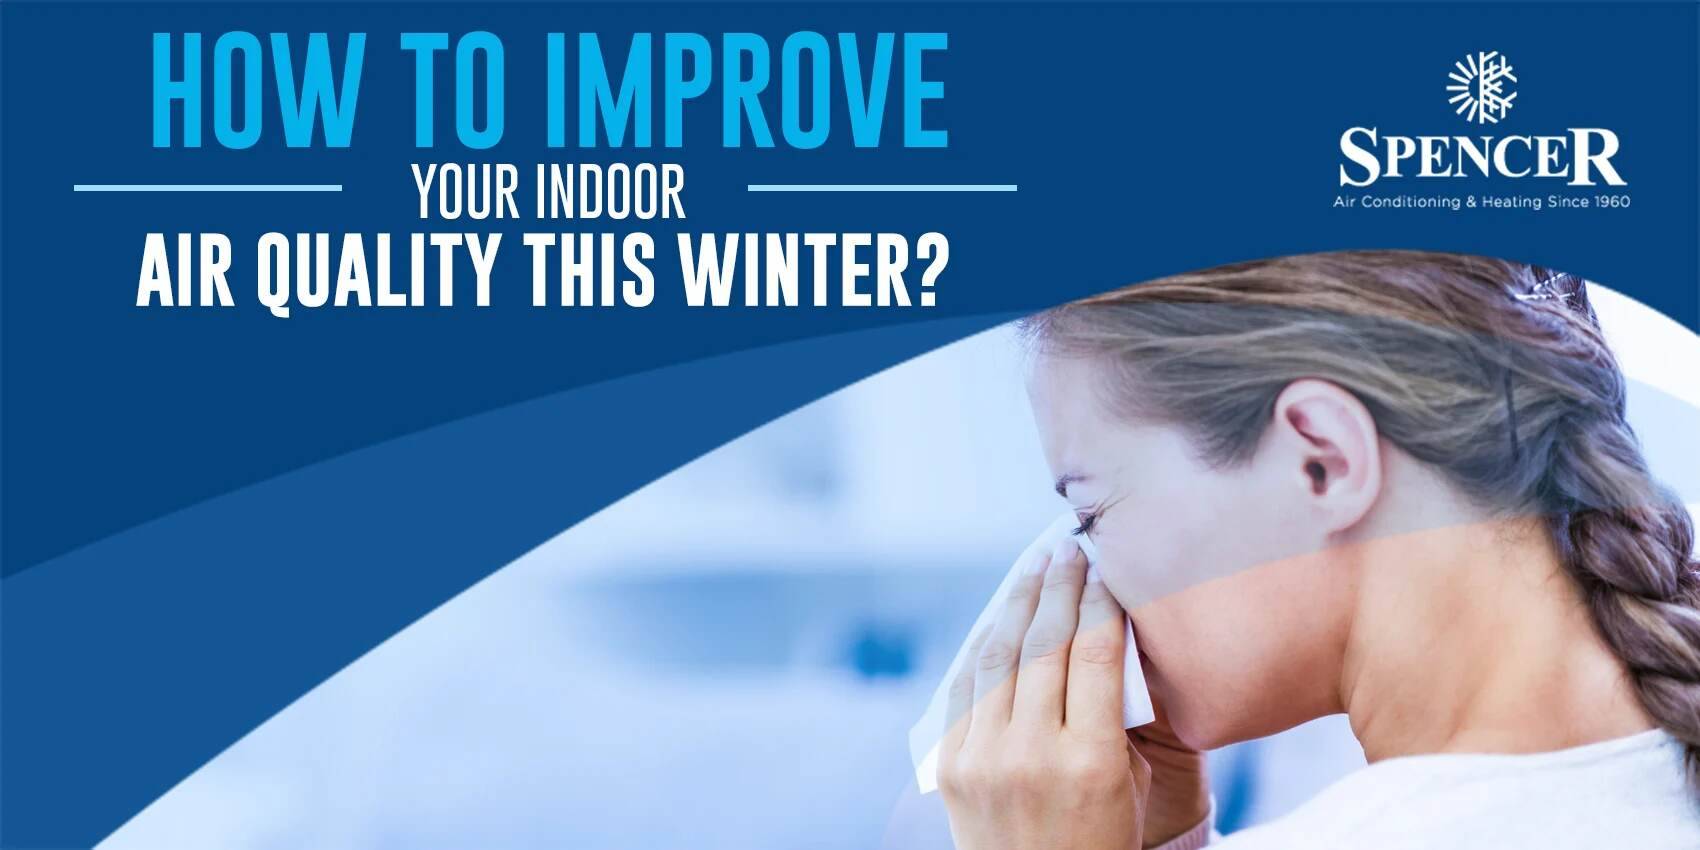 How to Improve Your Indoor Air Quality This Winter?